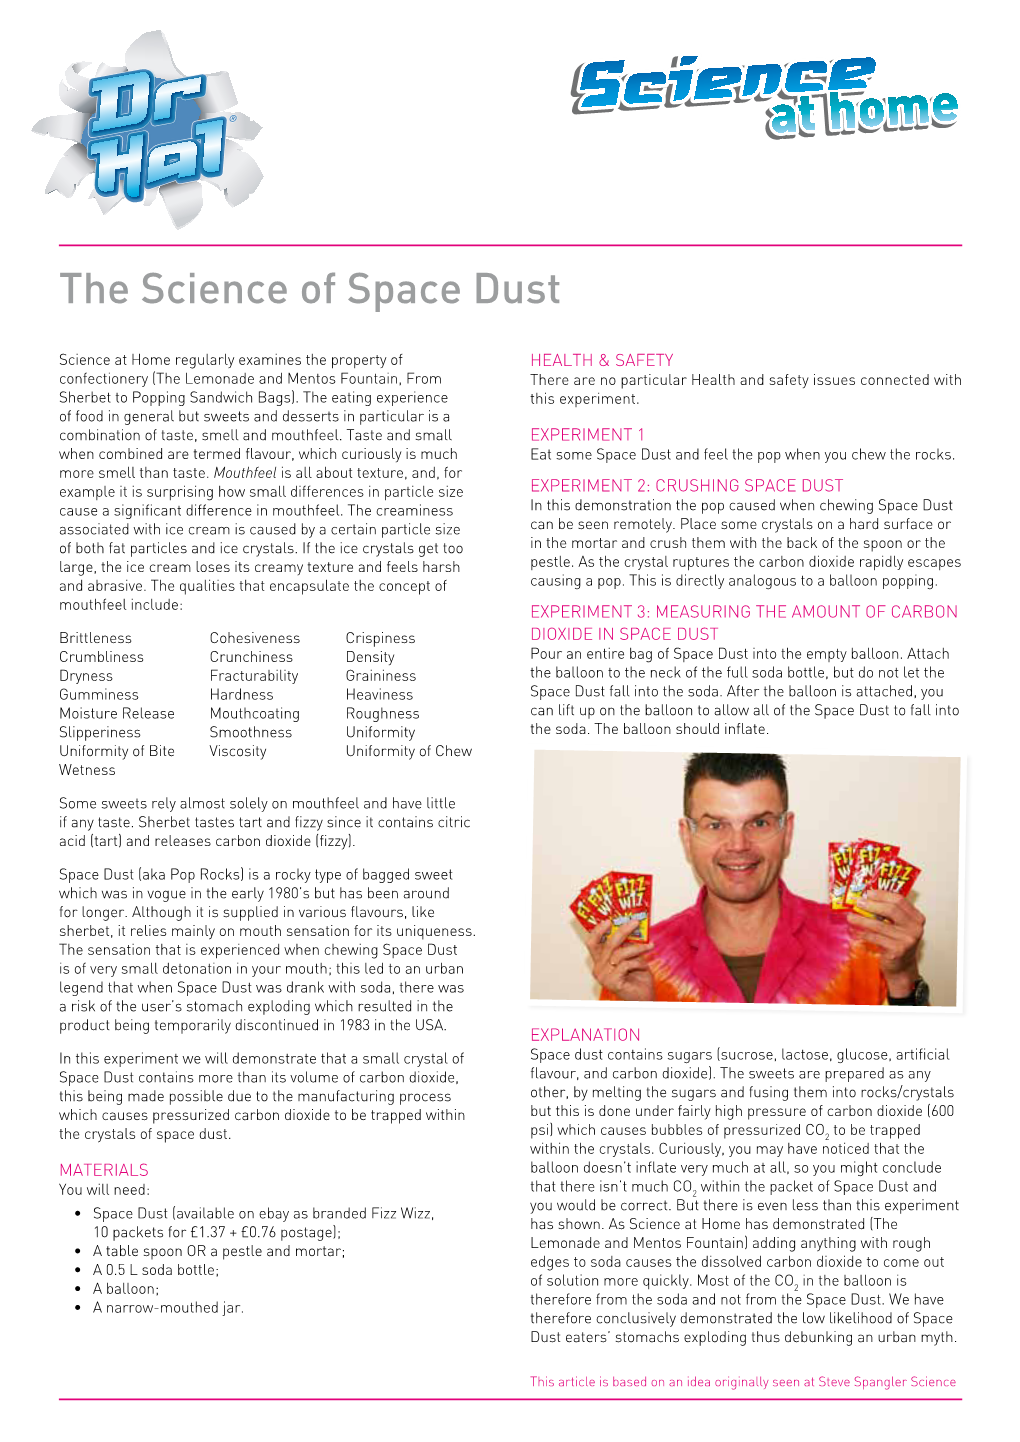 The Science of Space Dust